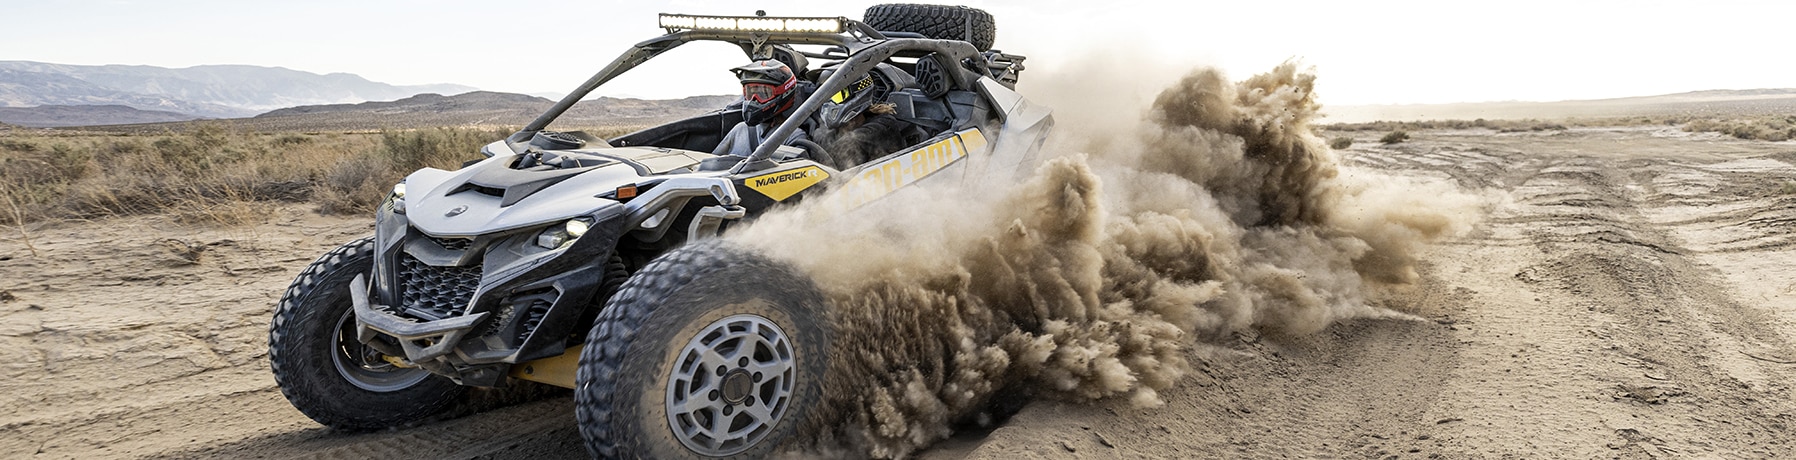 Two riders in a Can-Am Maverick R SxS vehicle speeding through the desert